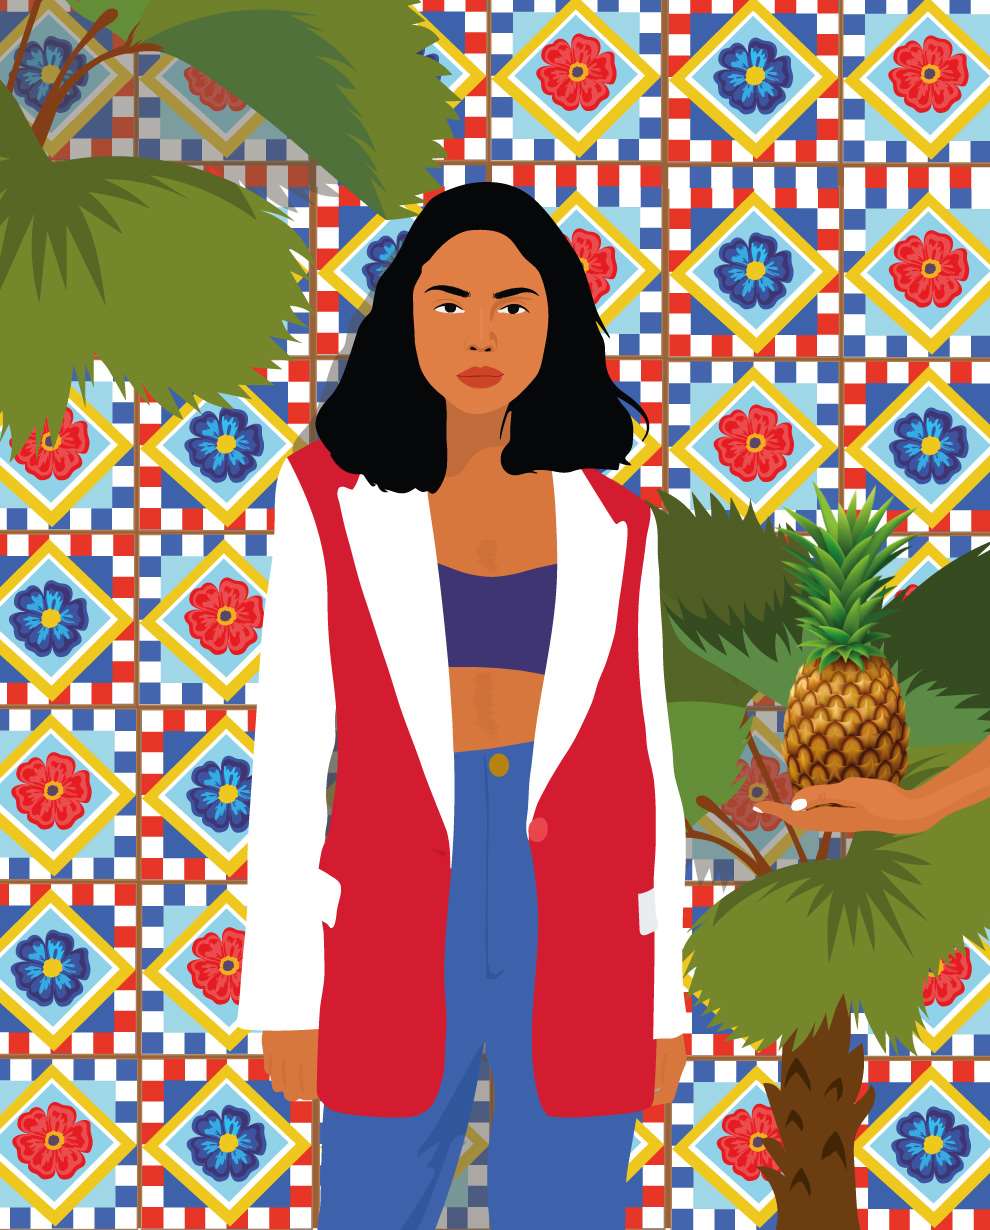 Camila Pinheiro, Bright vector digital illustration of a woman standing in summer room with detailed patterned wall mosaic print tiles with surrounding tropical plants. Summer vibes. 